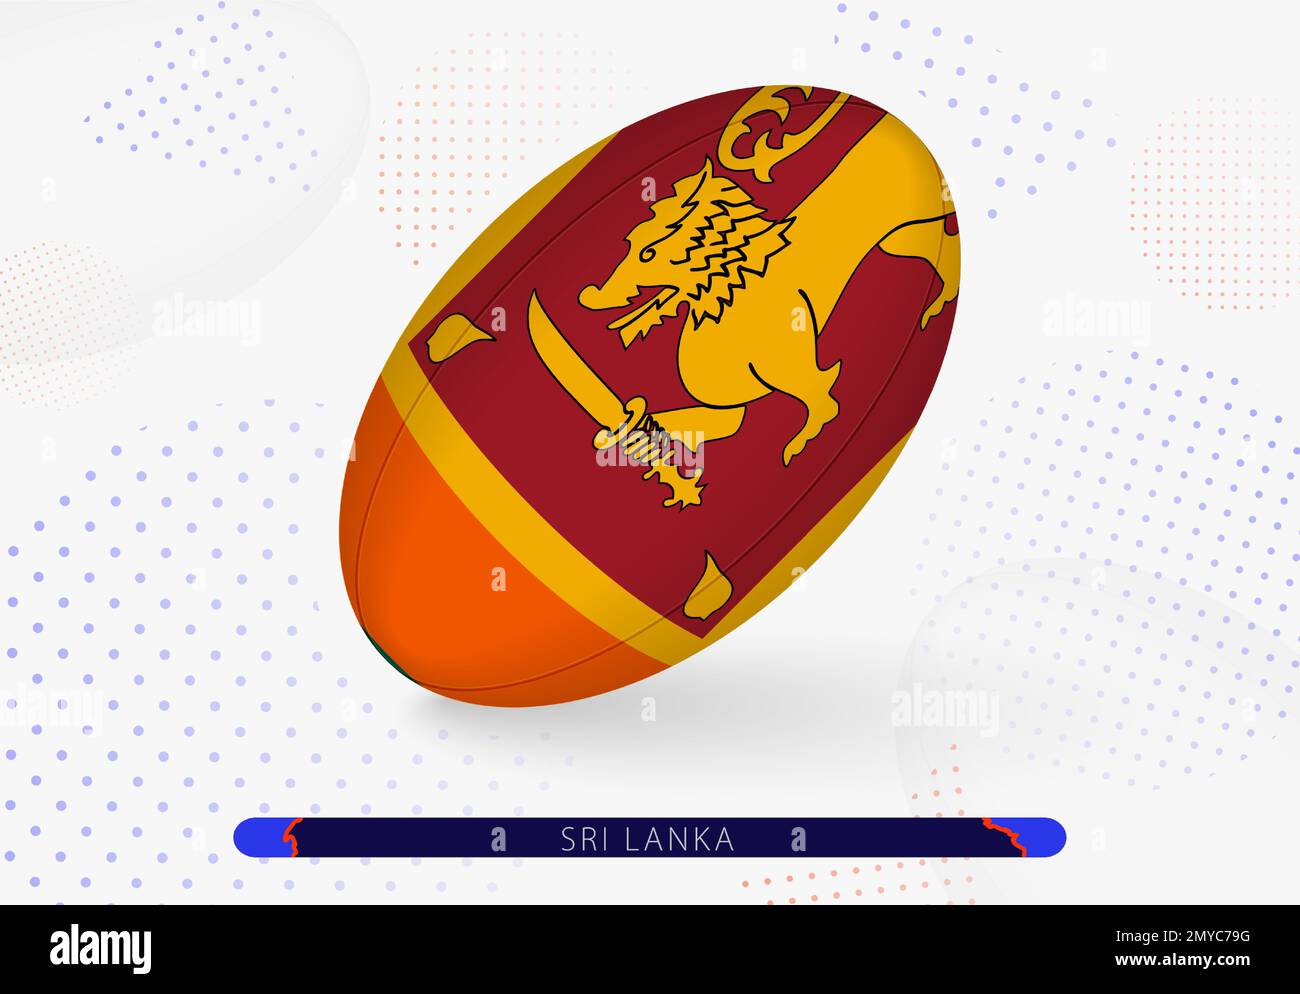 Rugby ball with the flag of Sri Lanka on it. Equipment for rugby team of Sri Lanka. Vector sport illustration. Stock Vector